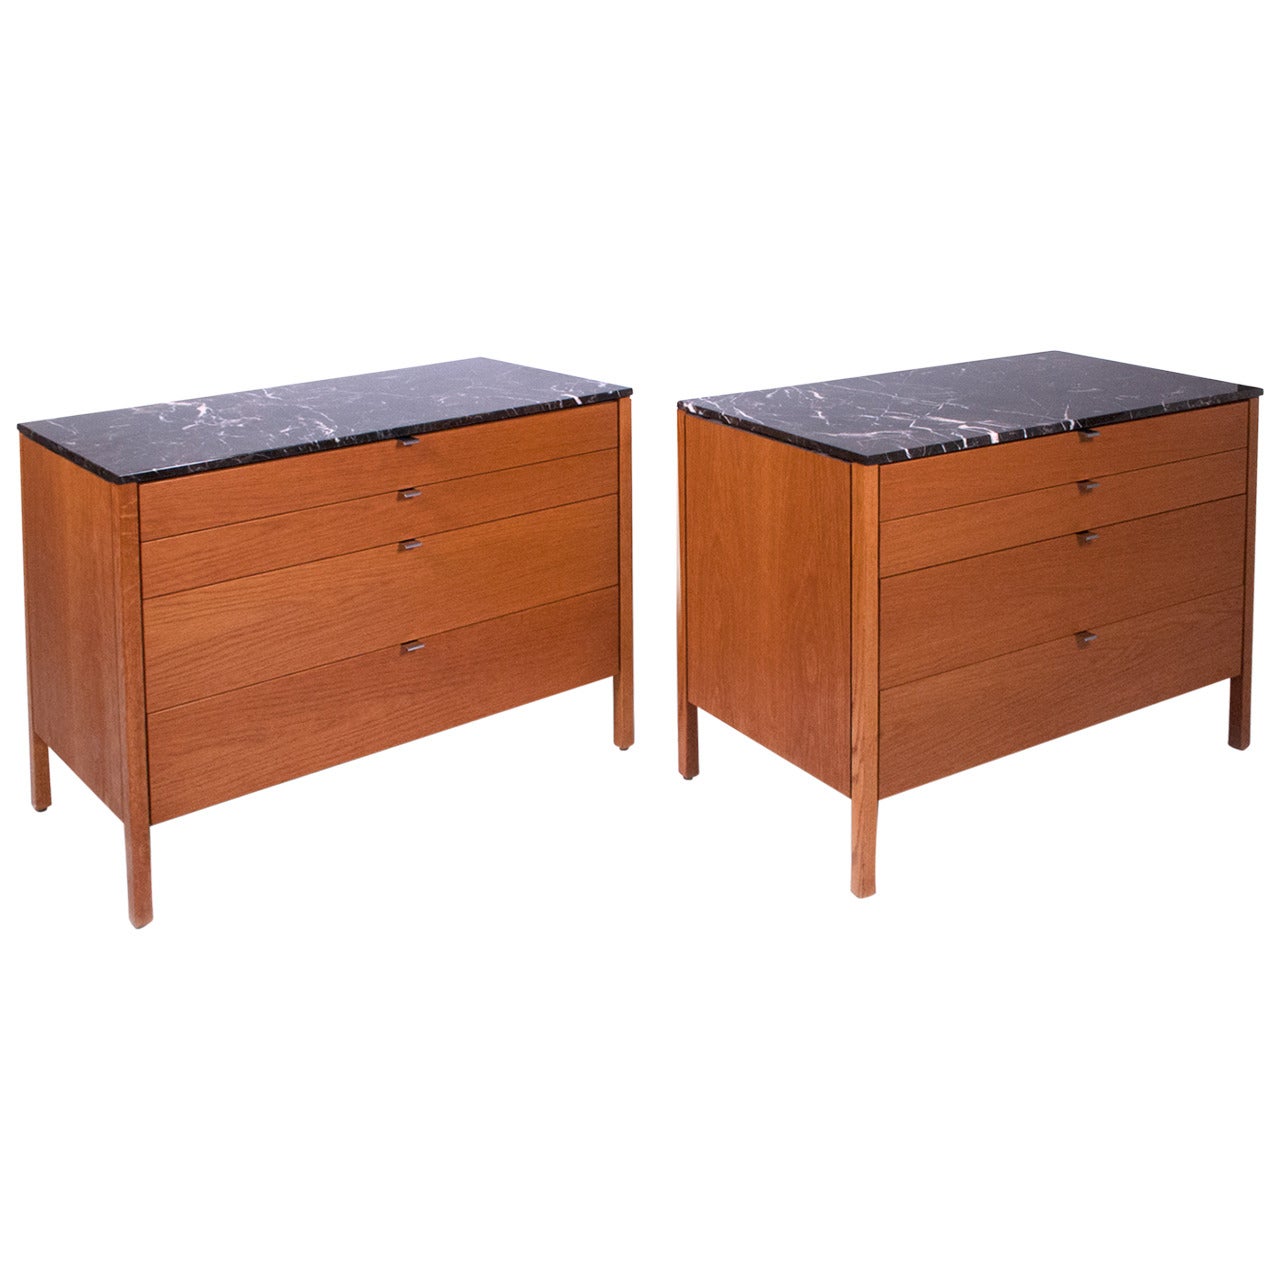 Florence Knoll Pair of Chests of Drawers #324